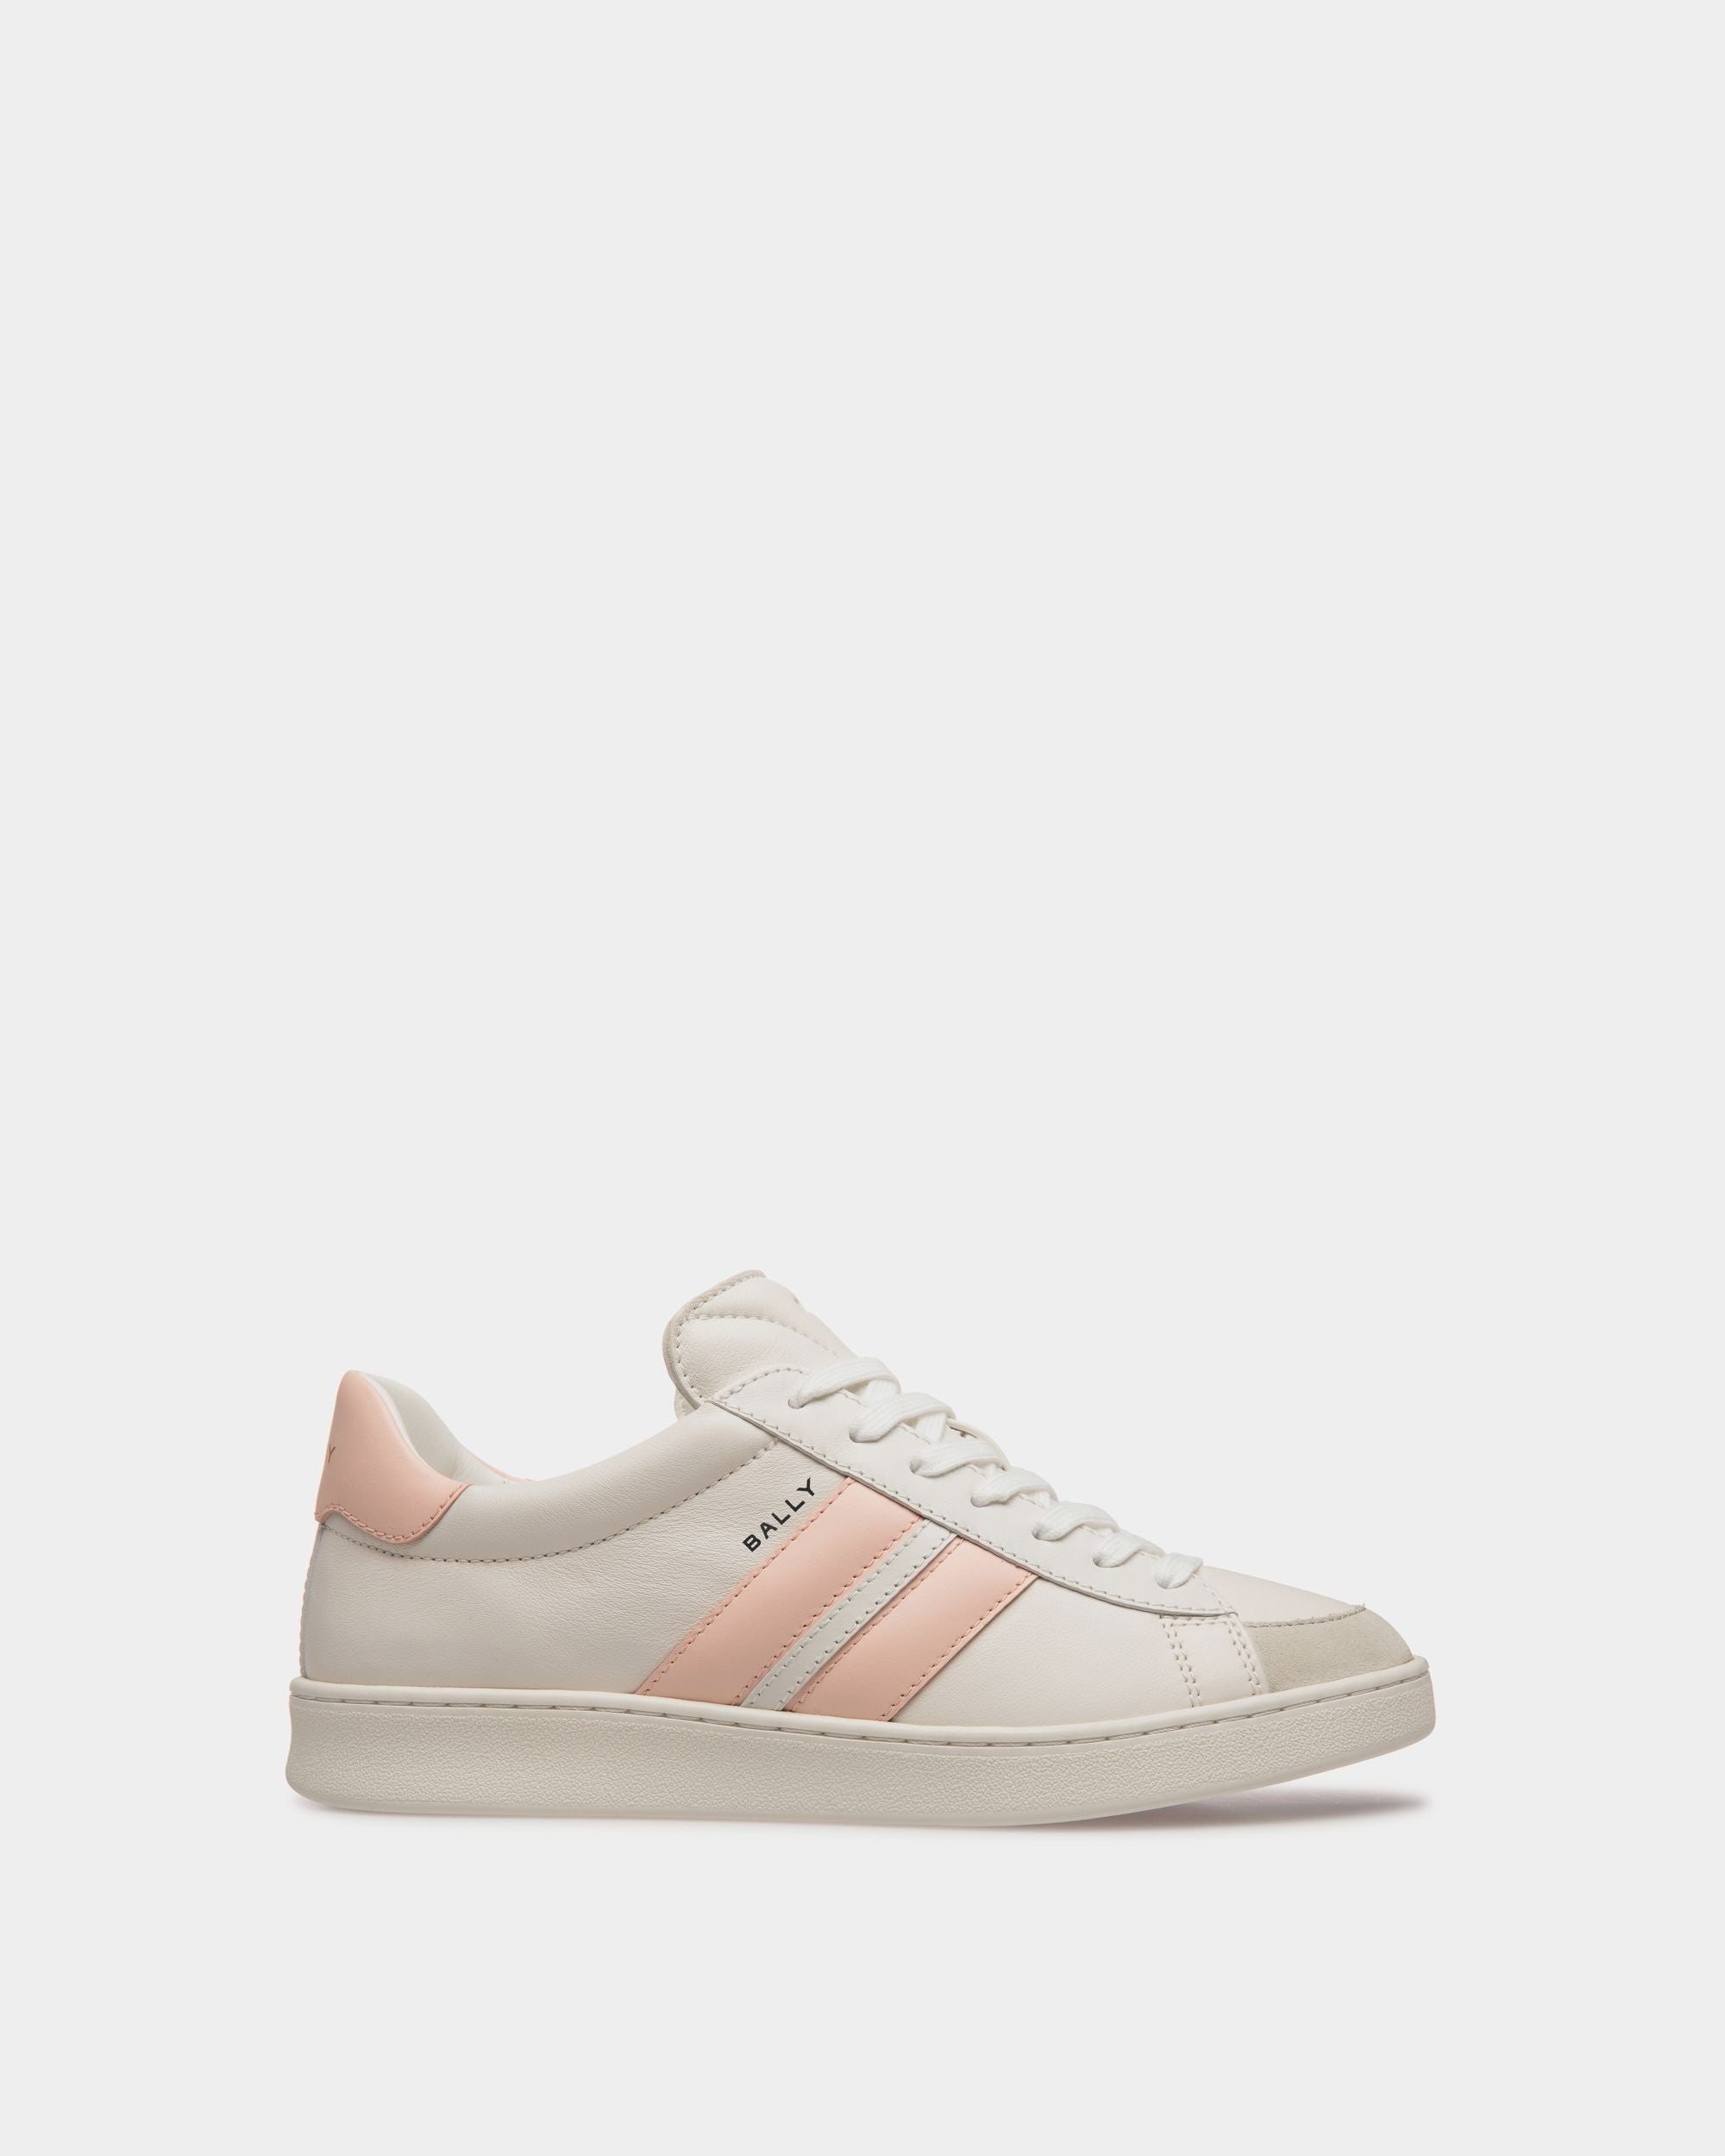 Tennis | Women's Sneaker in White and Baby Pink Leather | Bally | Still Life Side